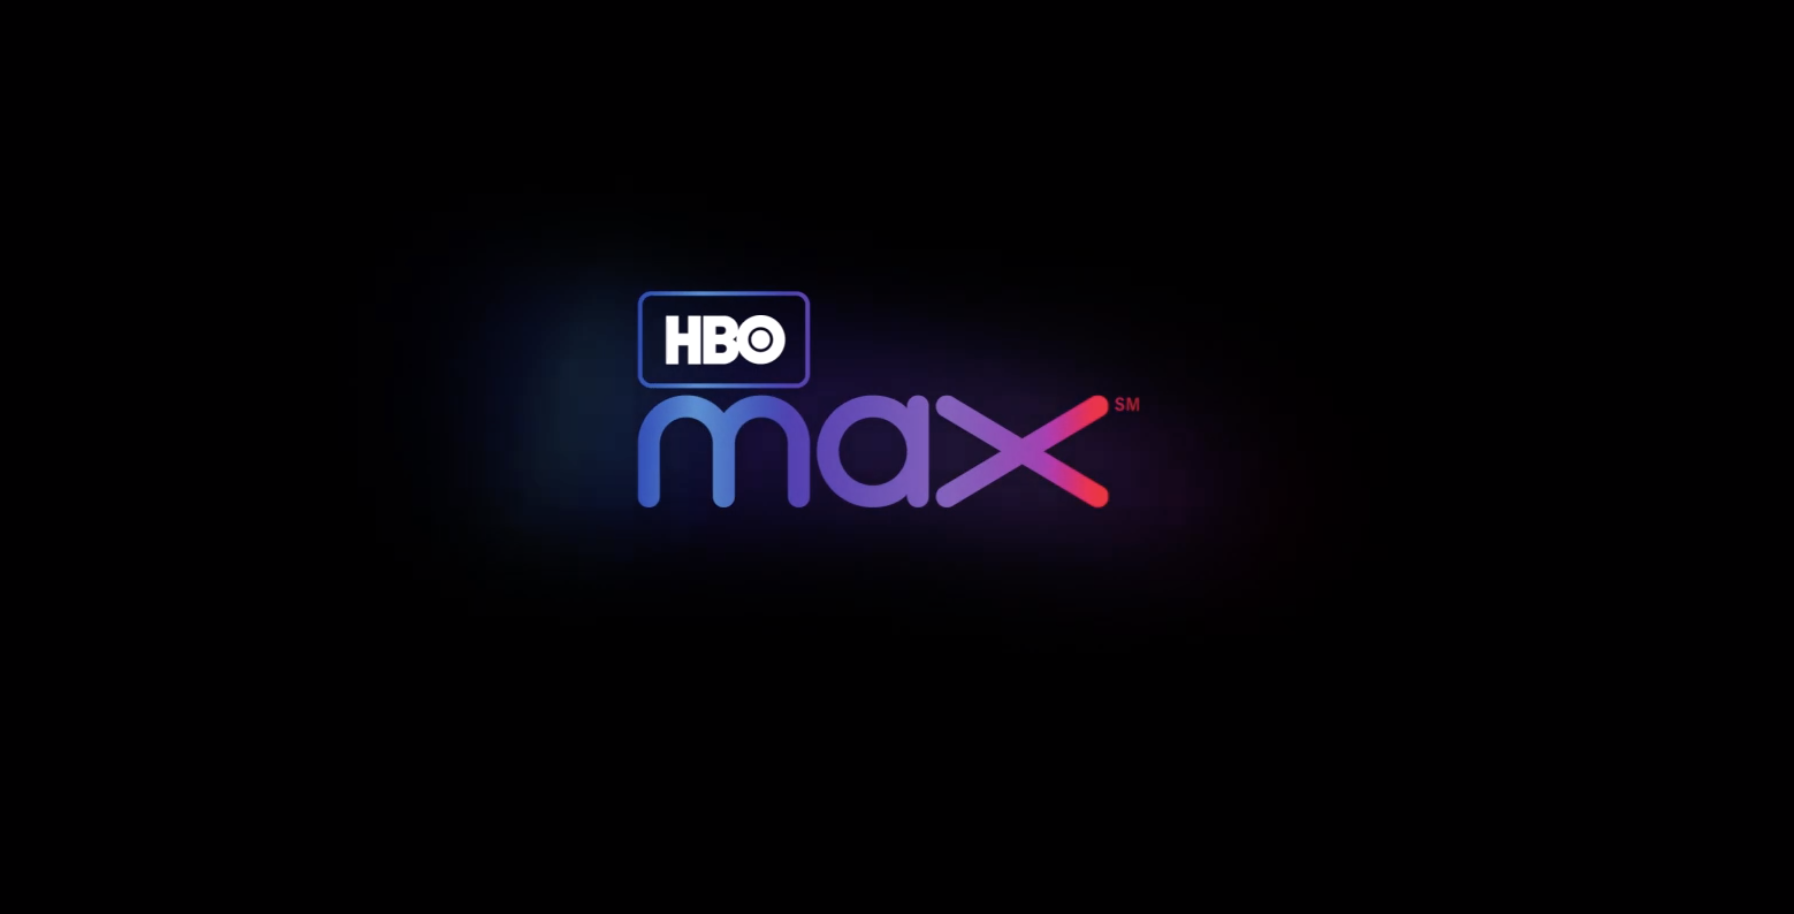 Trailer: HBO Max To Include HBO, DC Universe, TN, Cartoon Network, And More!